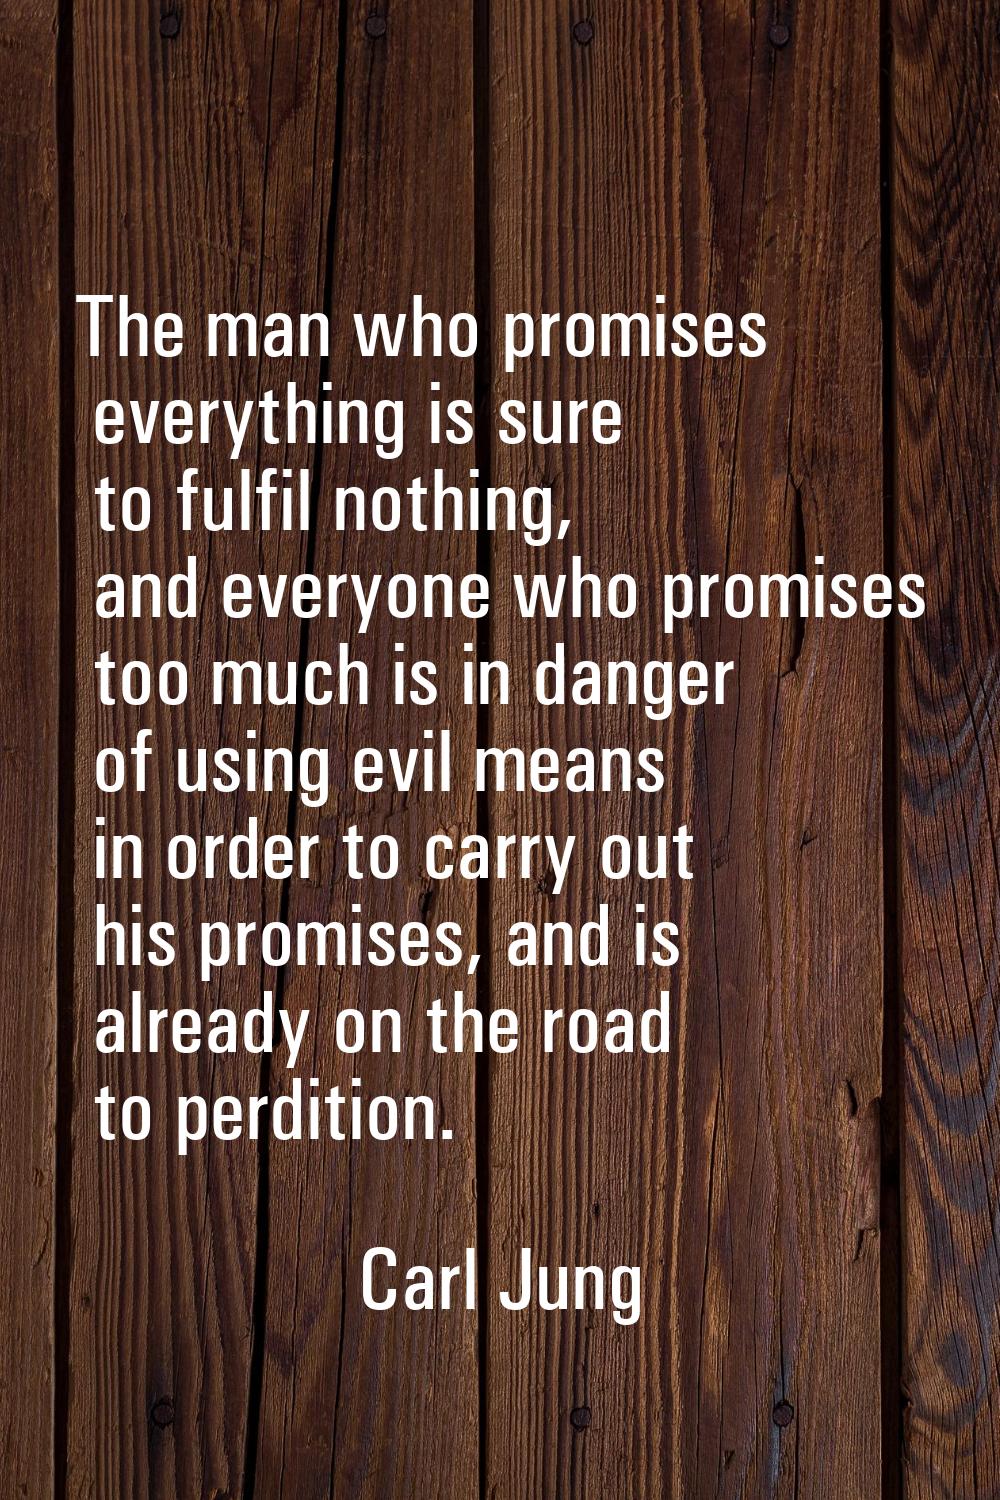 The man who promises everything is sure to fulfil nothing, and everyone who promises too much is in